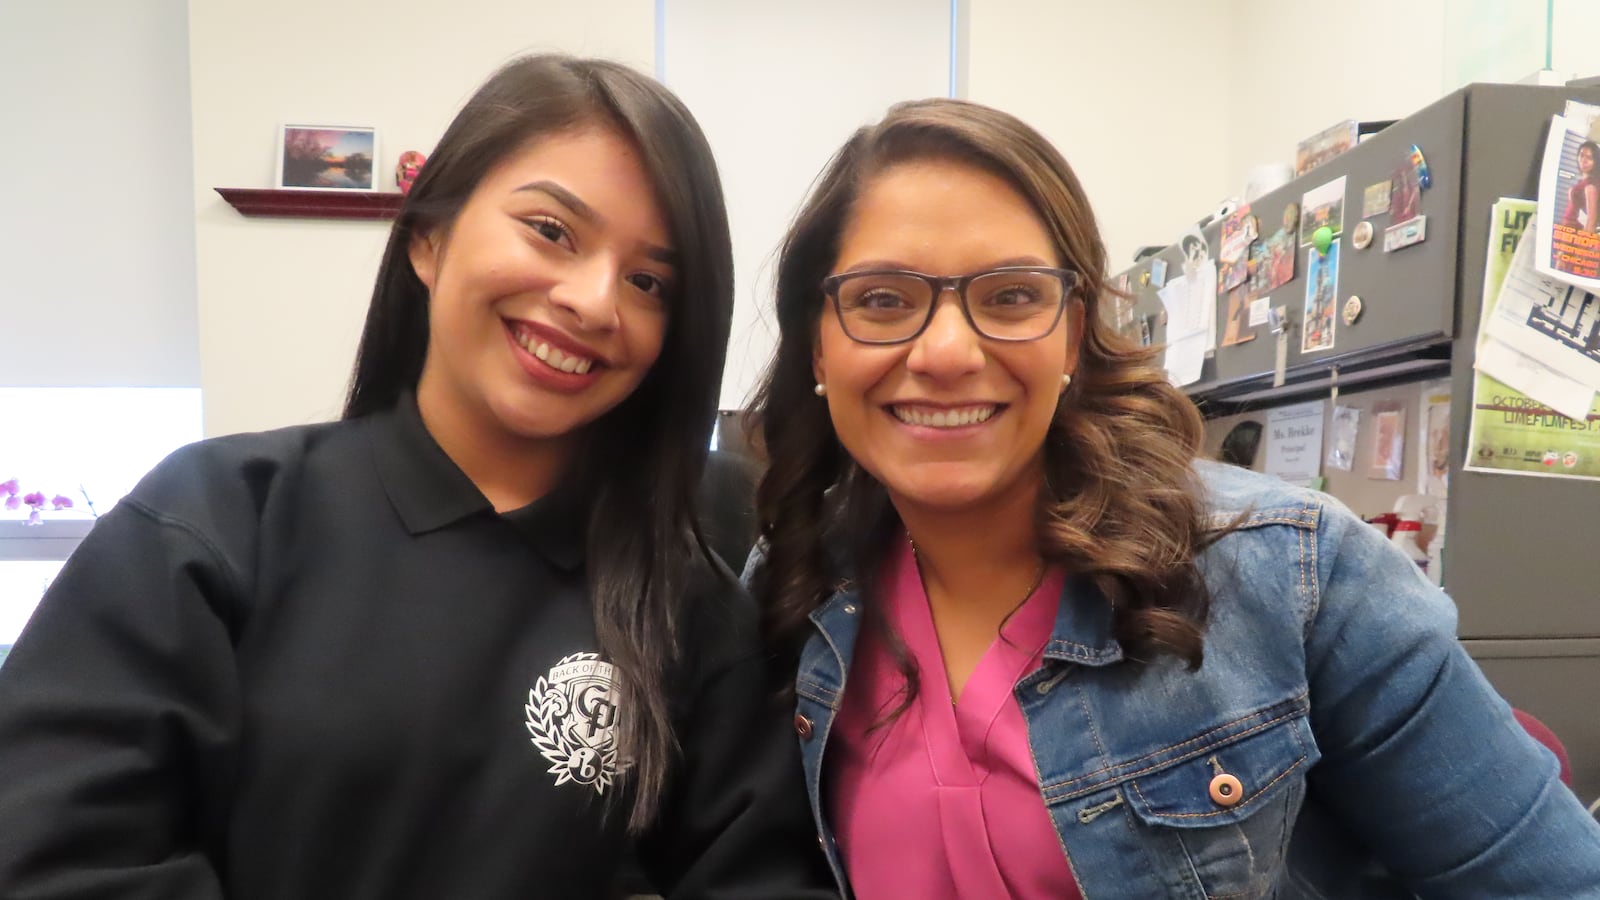 Back of the Yards College Prep senior Daniela Rendon wants to join her favorite teacher Nancy Guzman among the ranks of Latino teachers, whose numbers are disproportionately low at Chicago schools compared to student demographics.